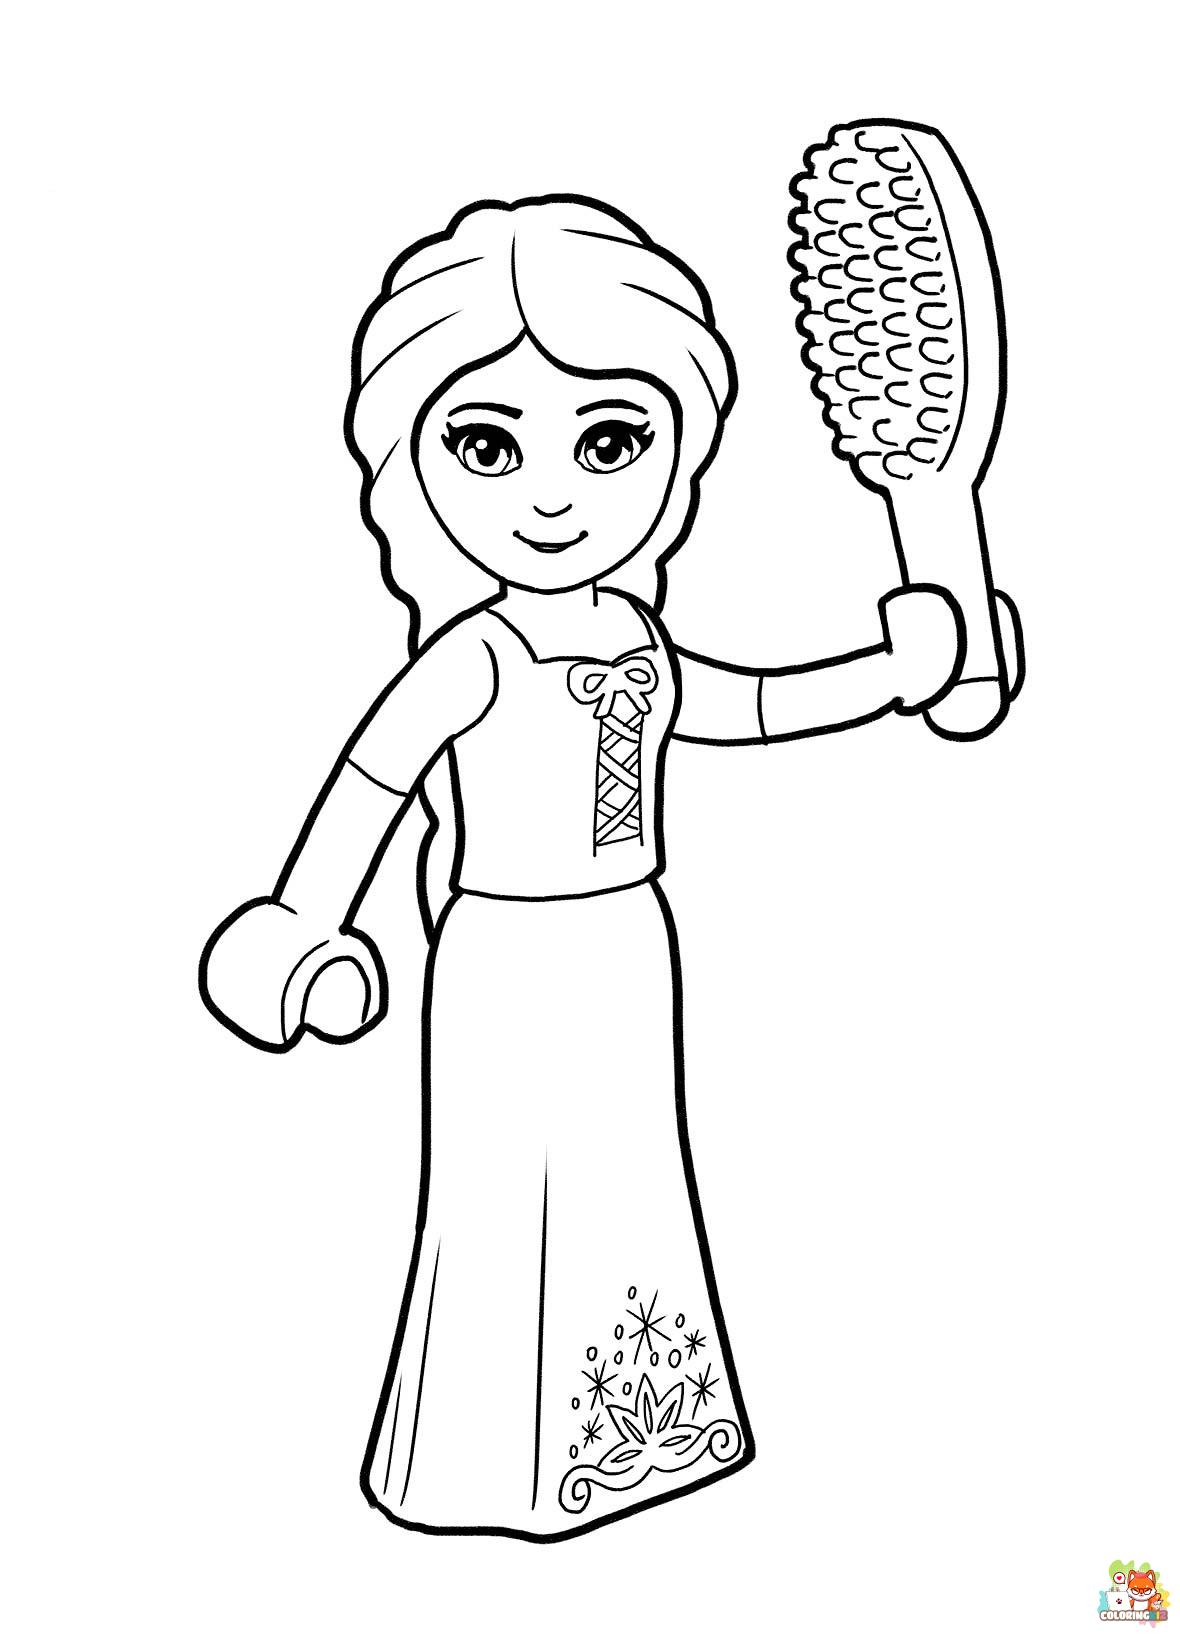 Lego Princess Coloring Pages 1